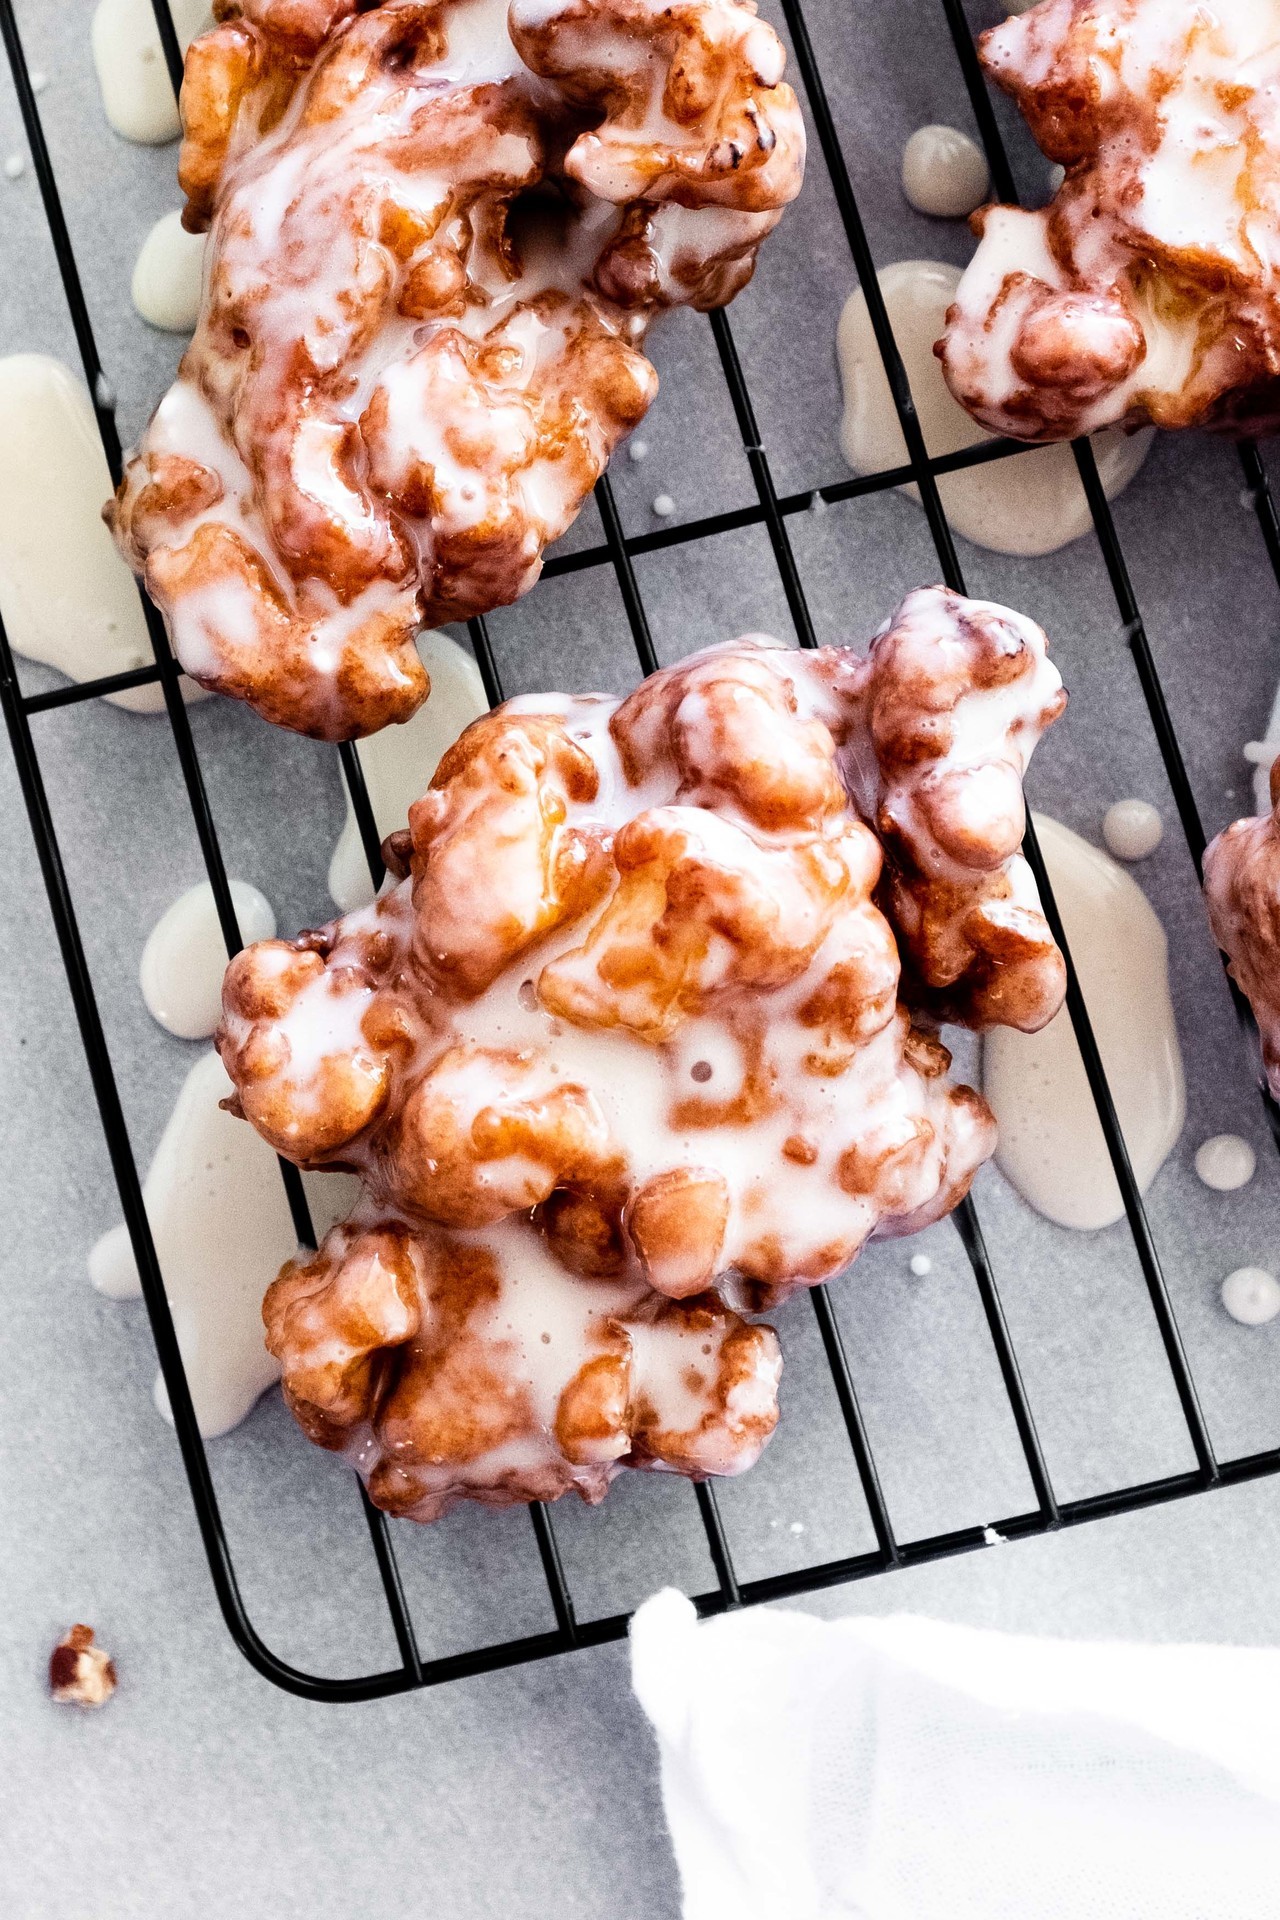 fullcravings: Warm apple fritters and a cup of coffee on a crisp autumn day — is